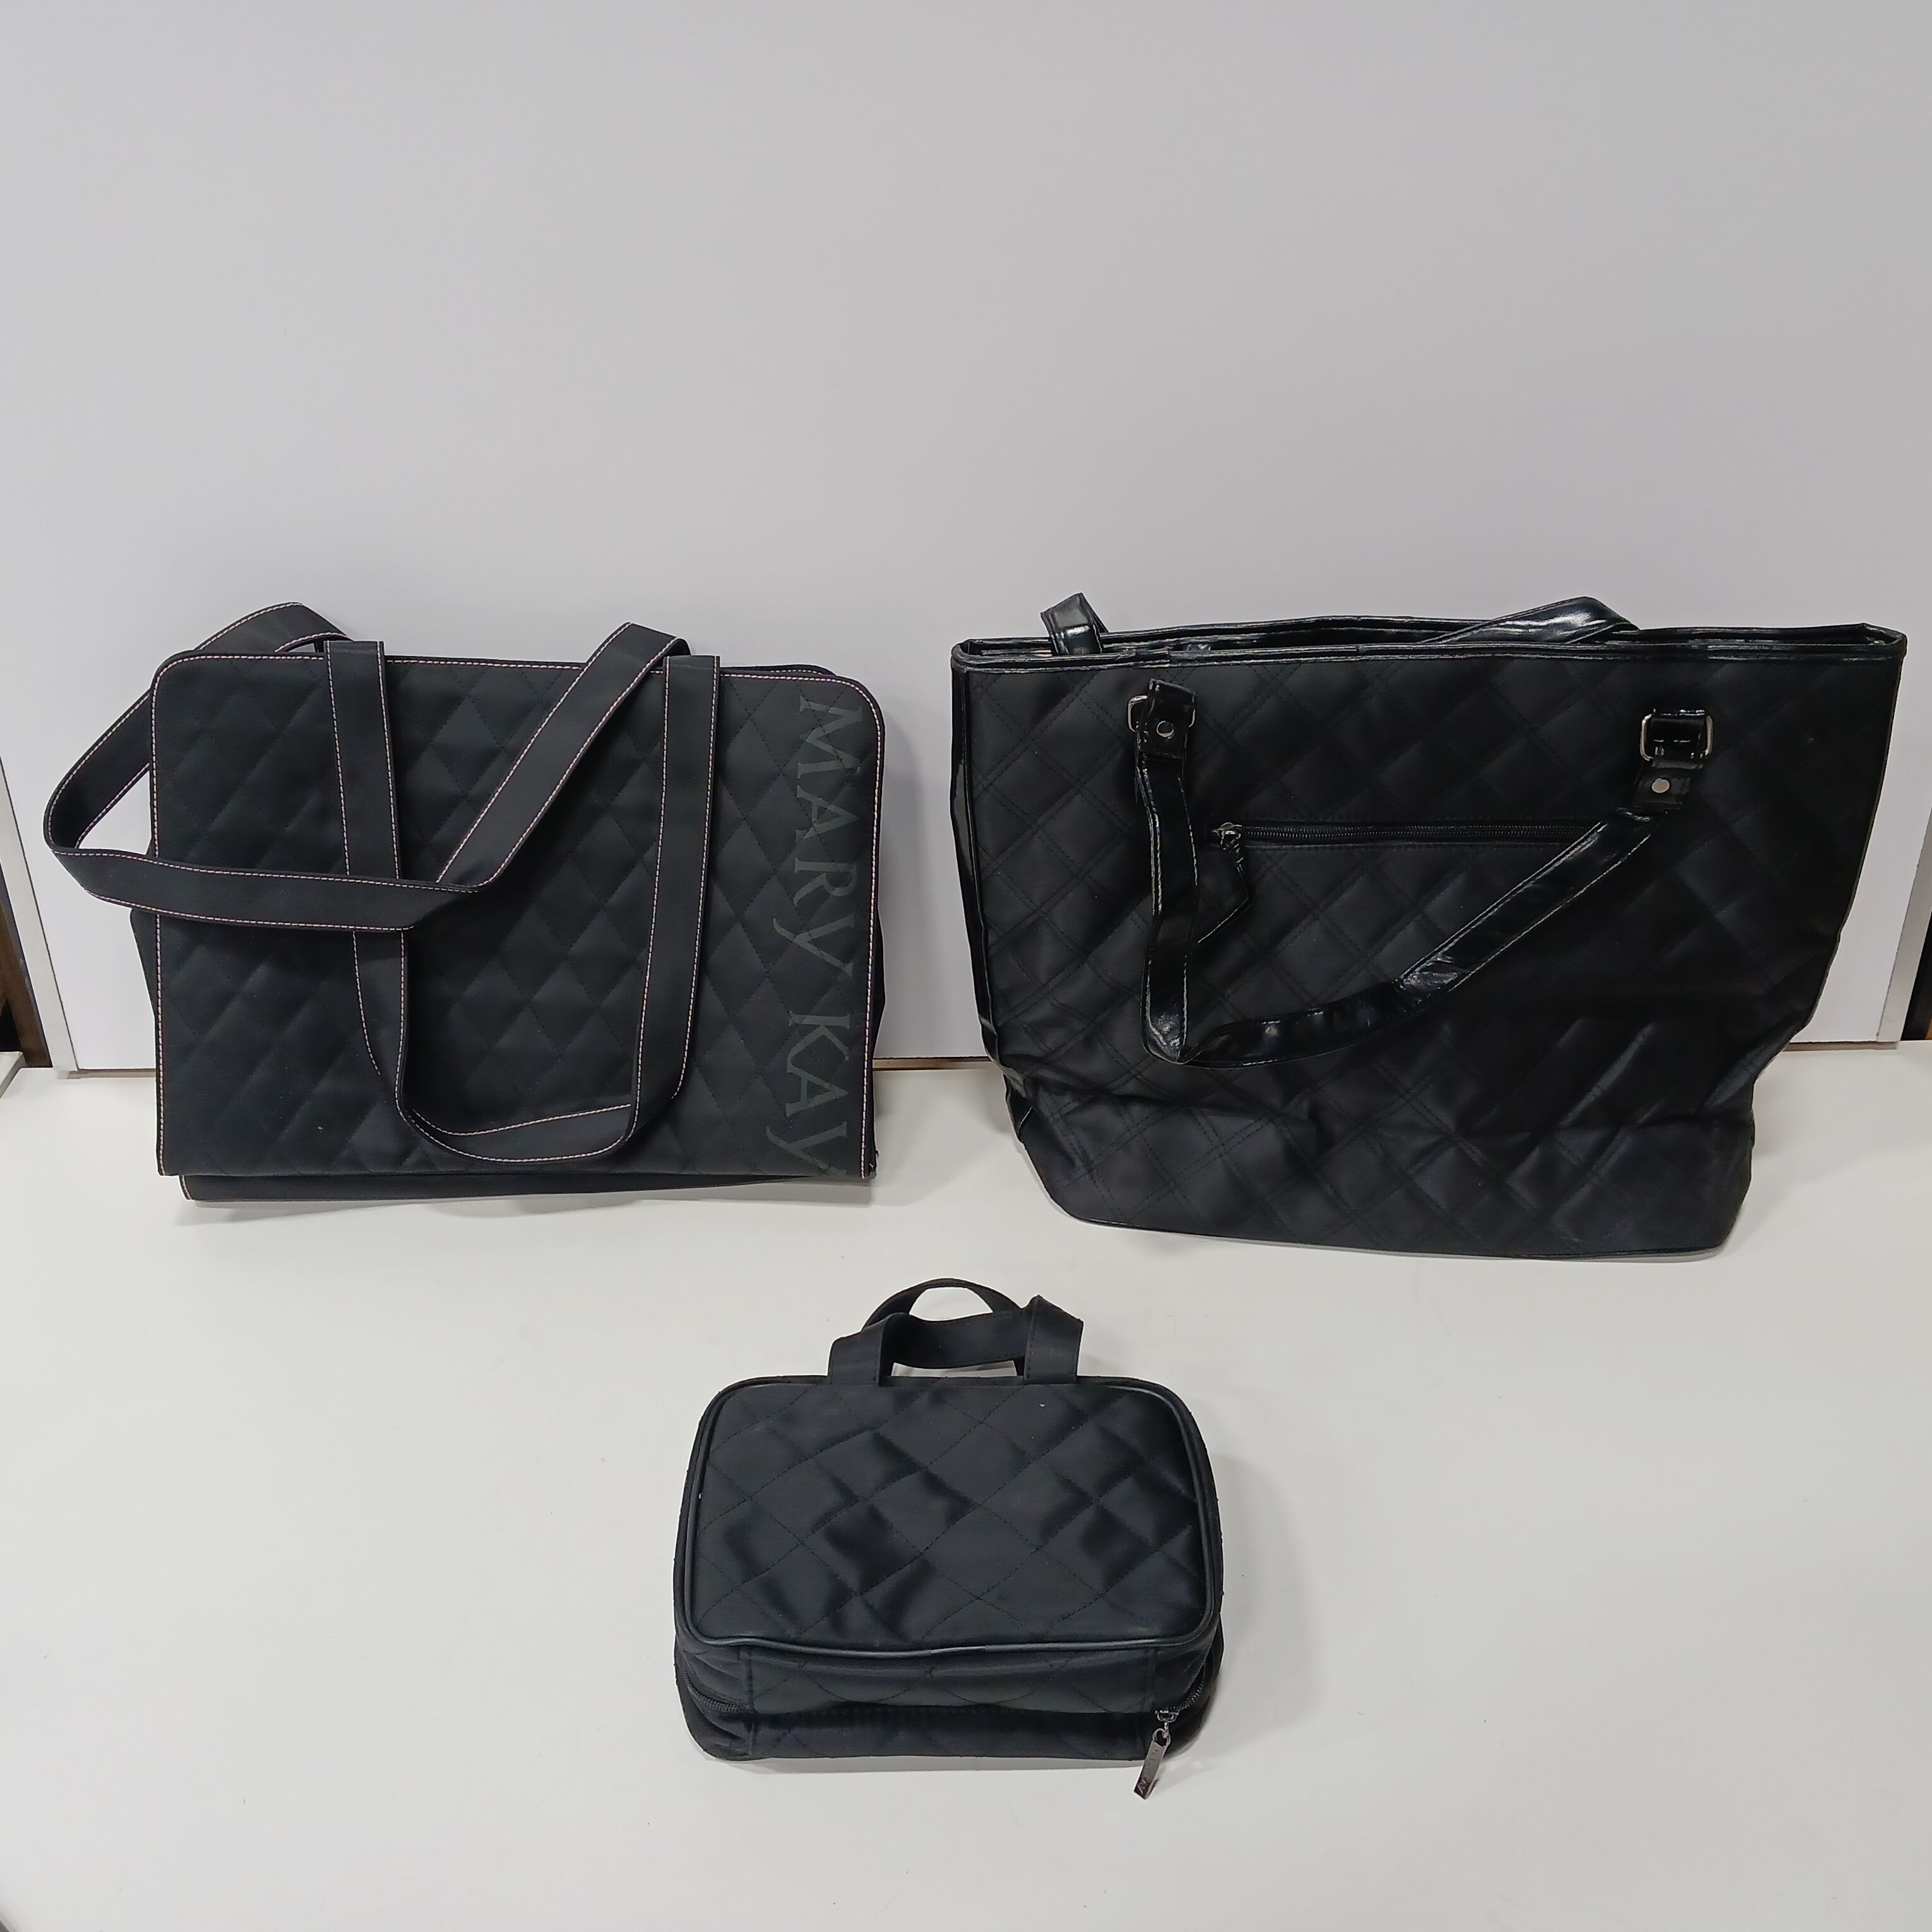 Bags & Purses Luggage & Travel Briefcases & Attaches Vintage calf leather case with bras details 60's 